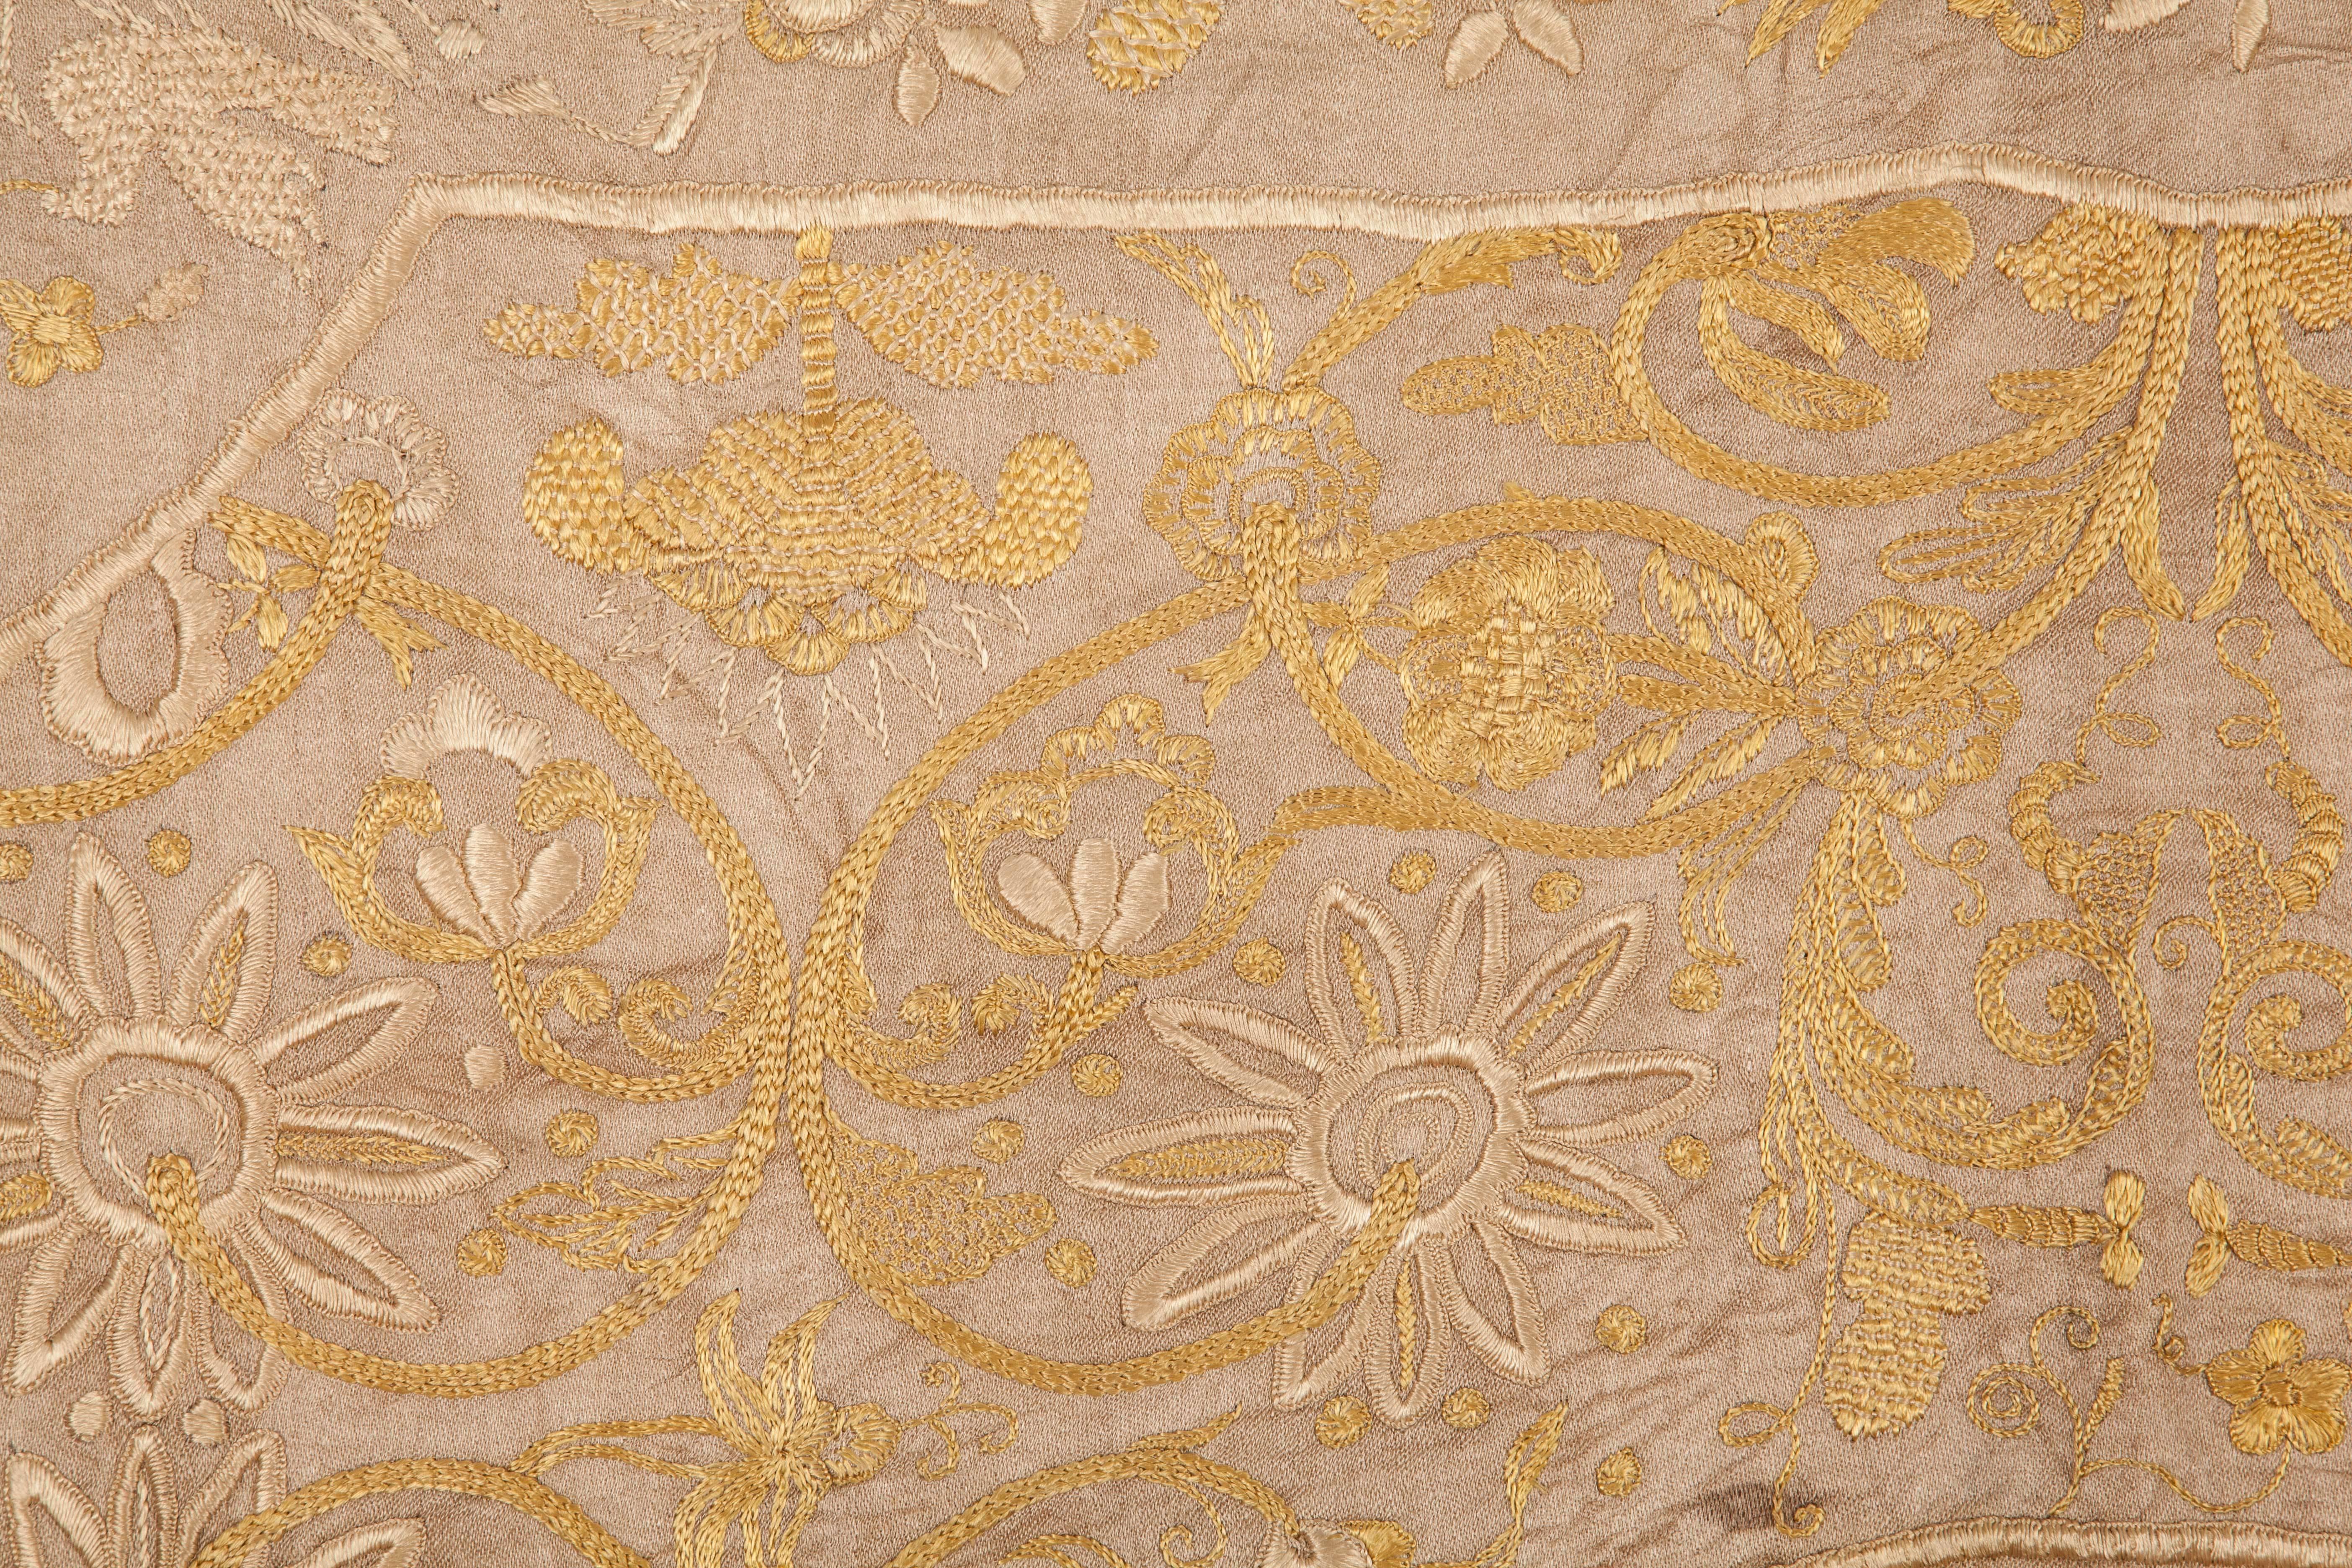 Indian 19th Century Indo Portuguese Silk Embroidery on Silk Background